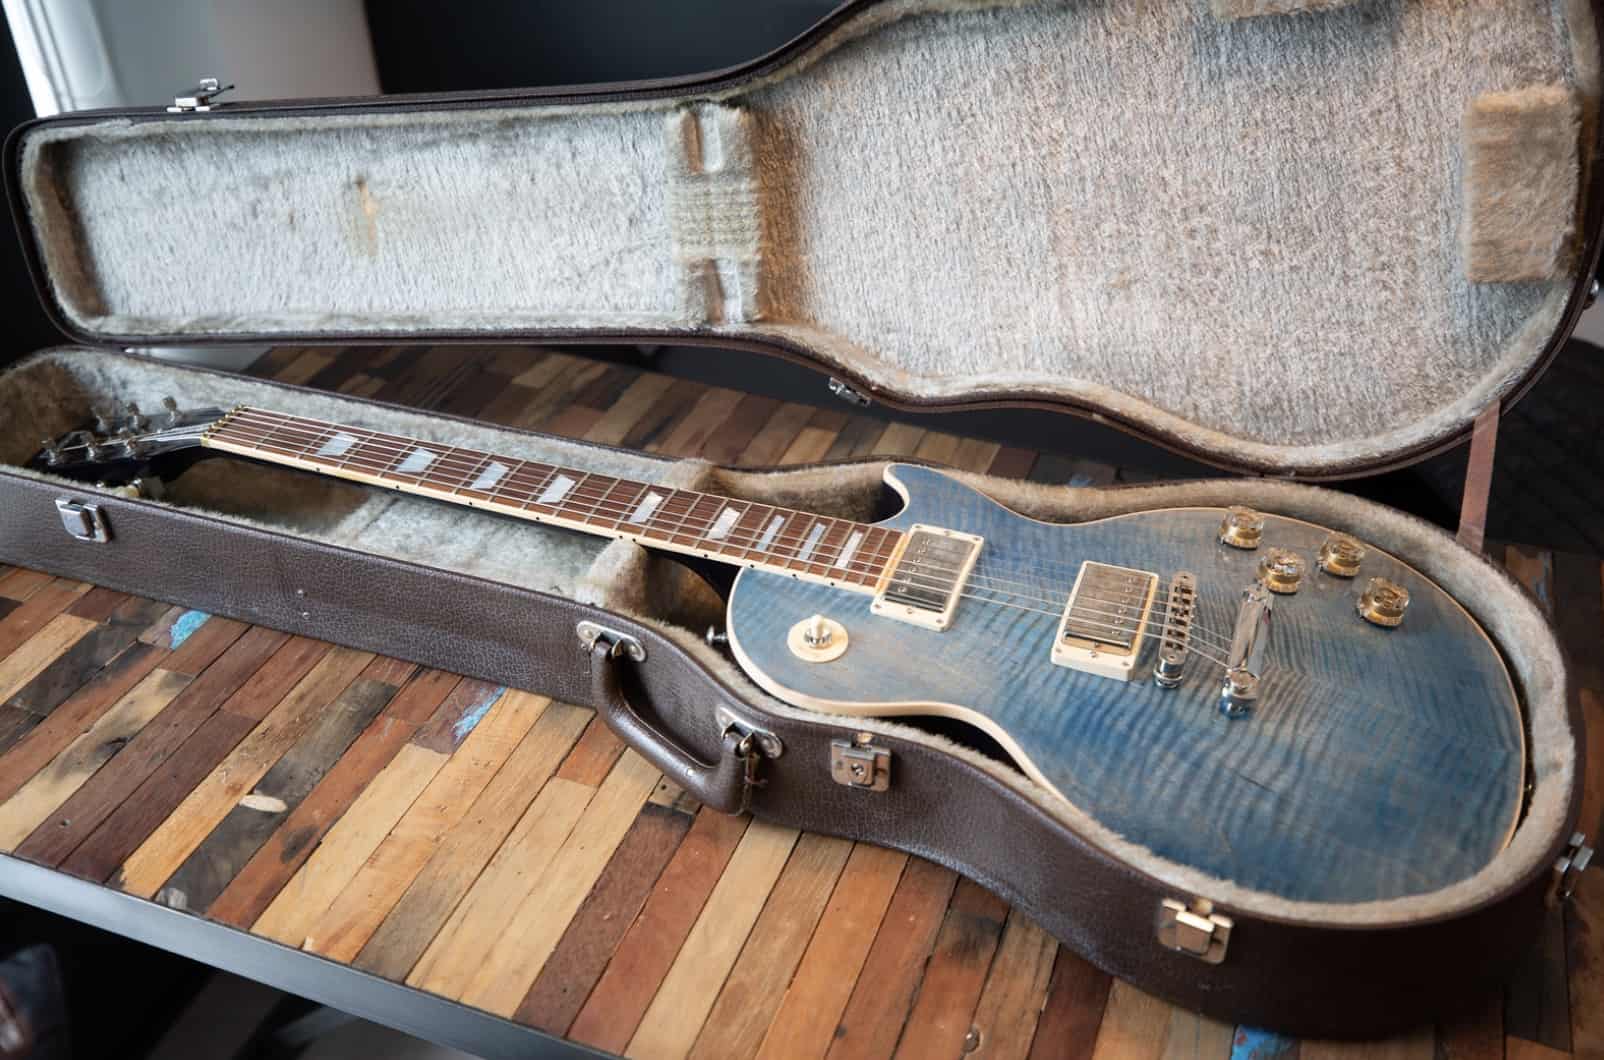 Blue Les Paul Electric Guitar With Gig Bag